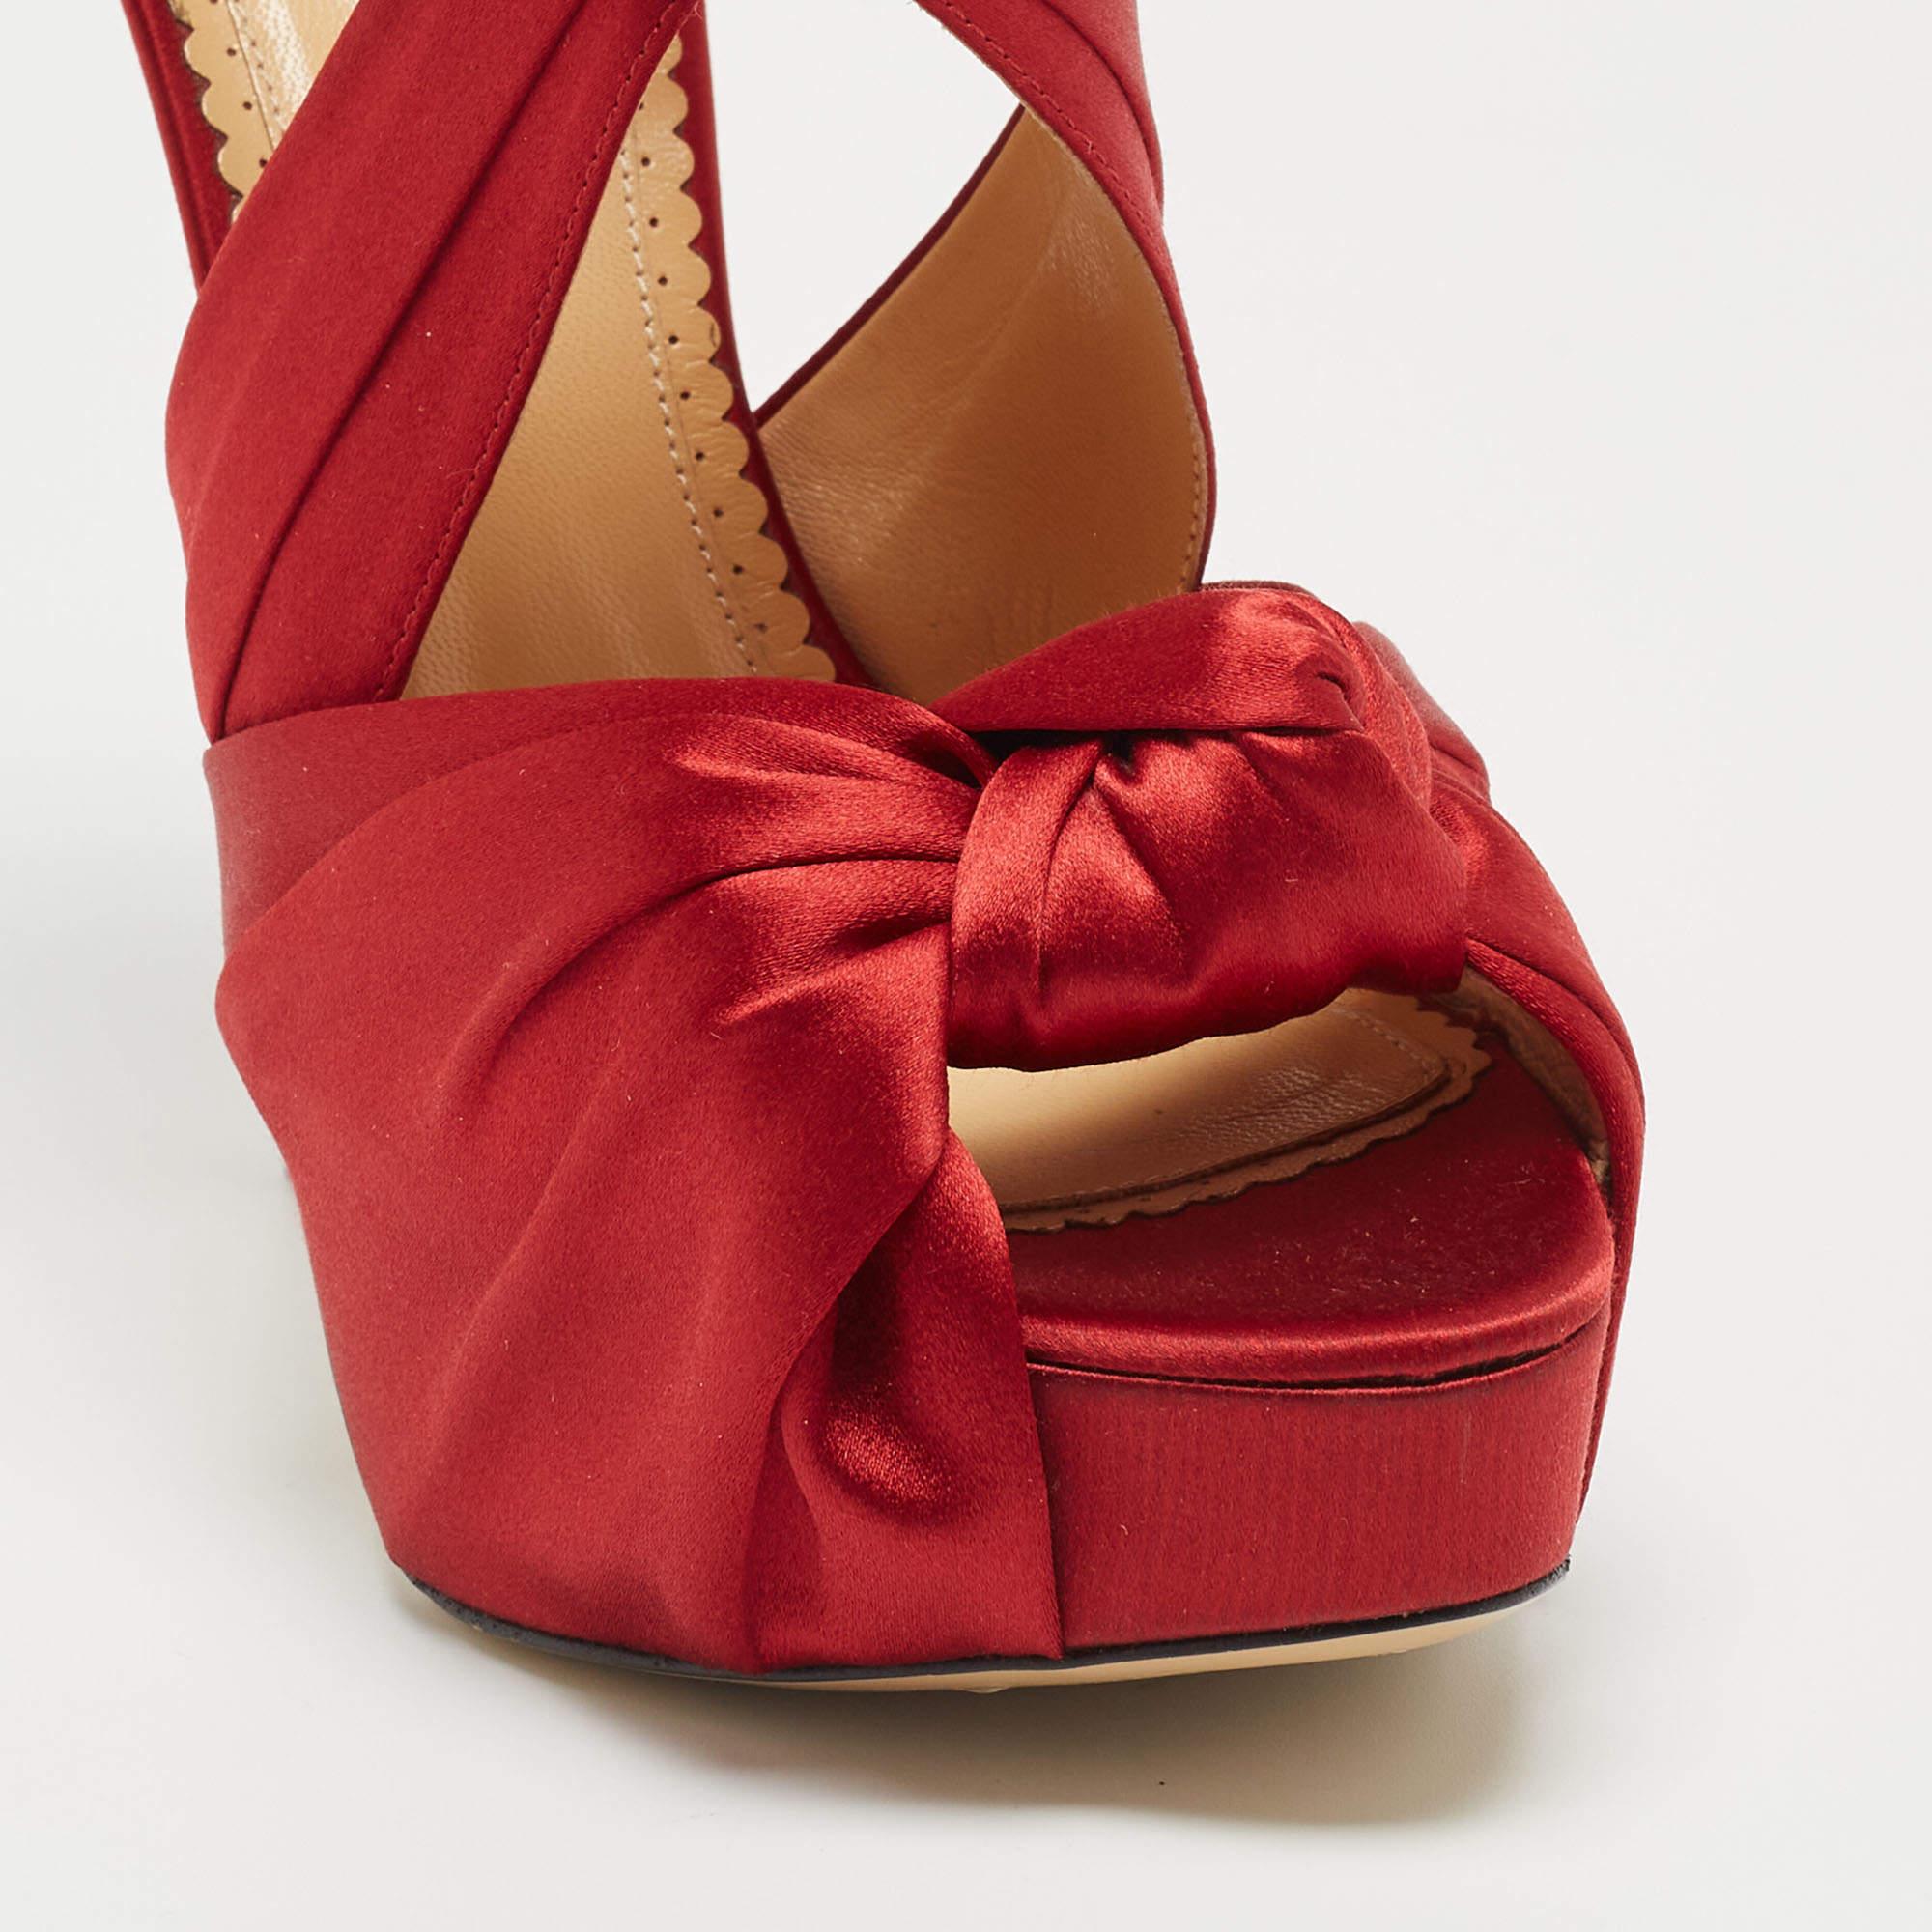 Charlotte Olympia Red Satin Andrea Knotted Platform Sandals Size 41 For Sale 3